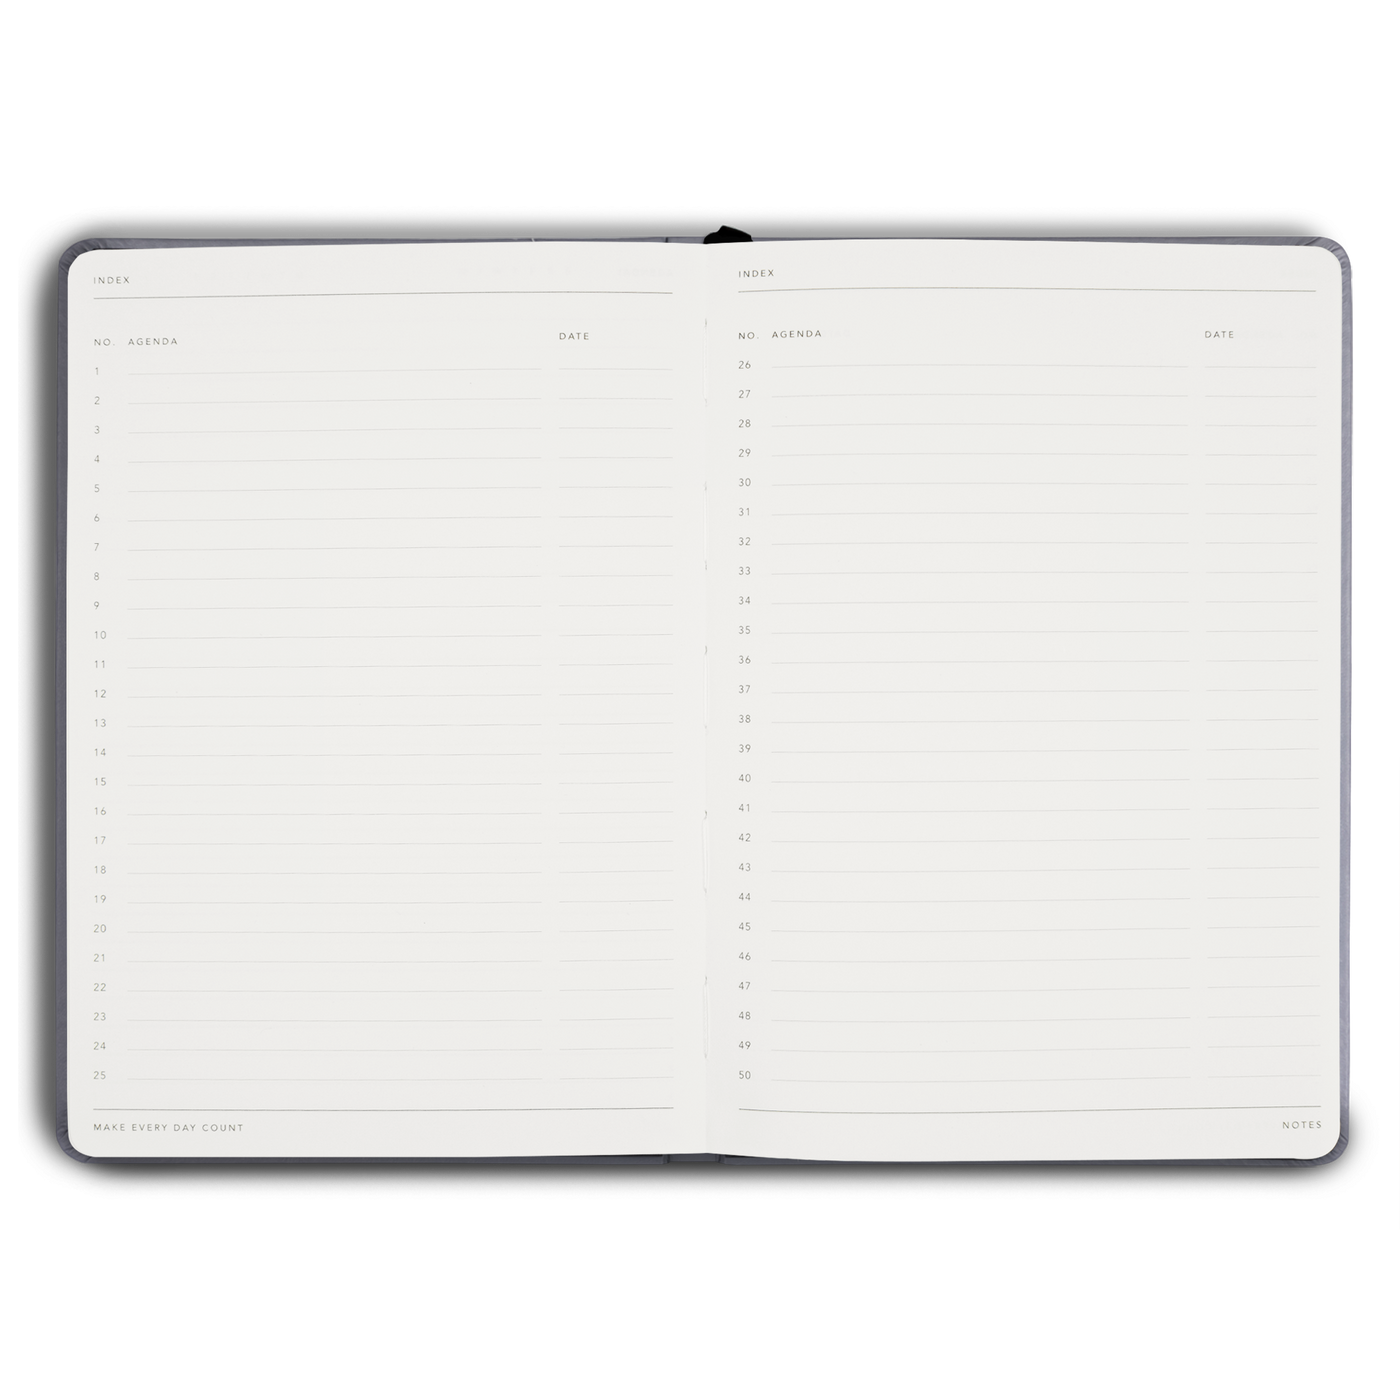 Notes Journal